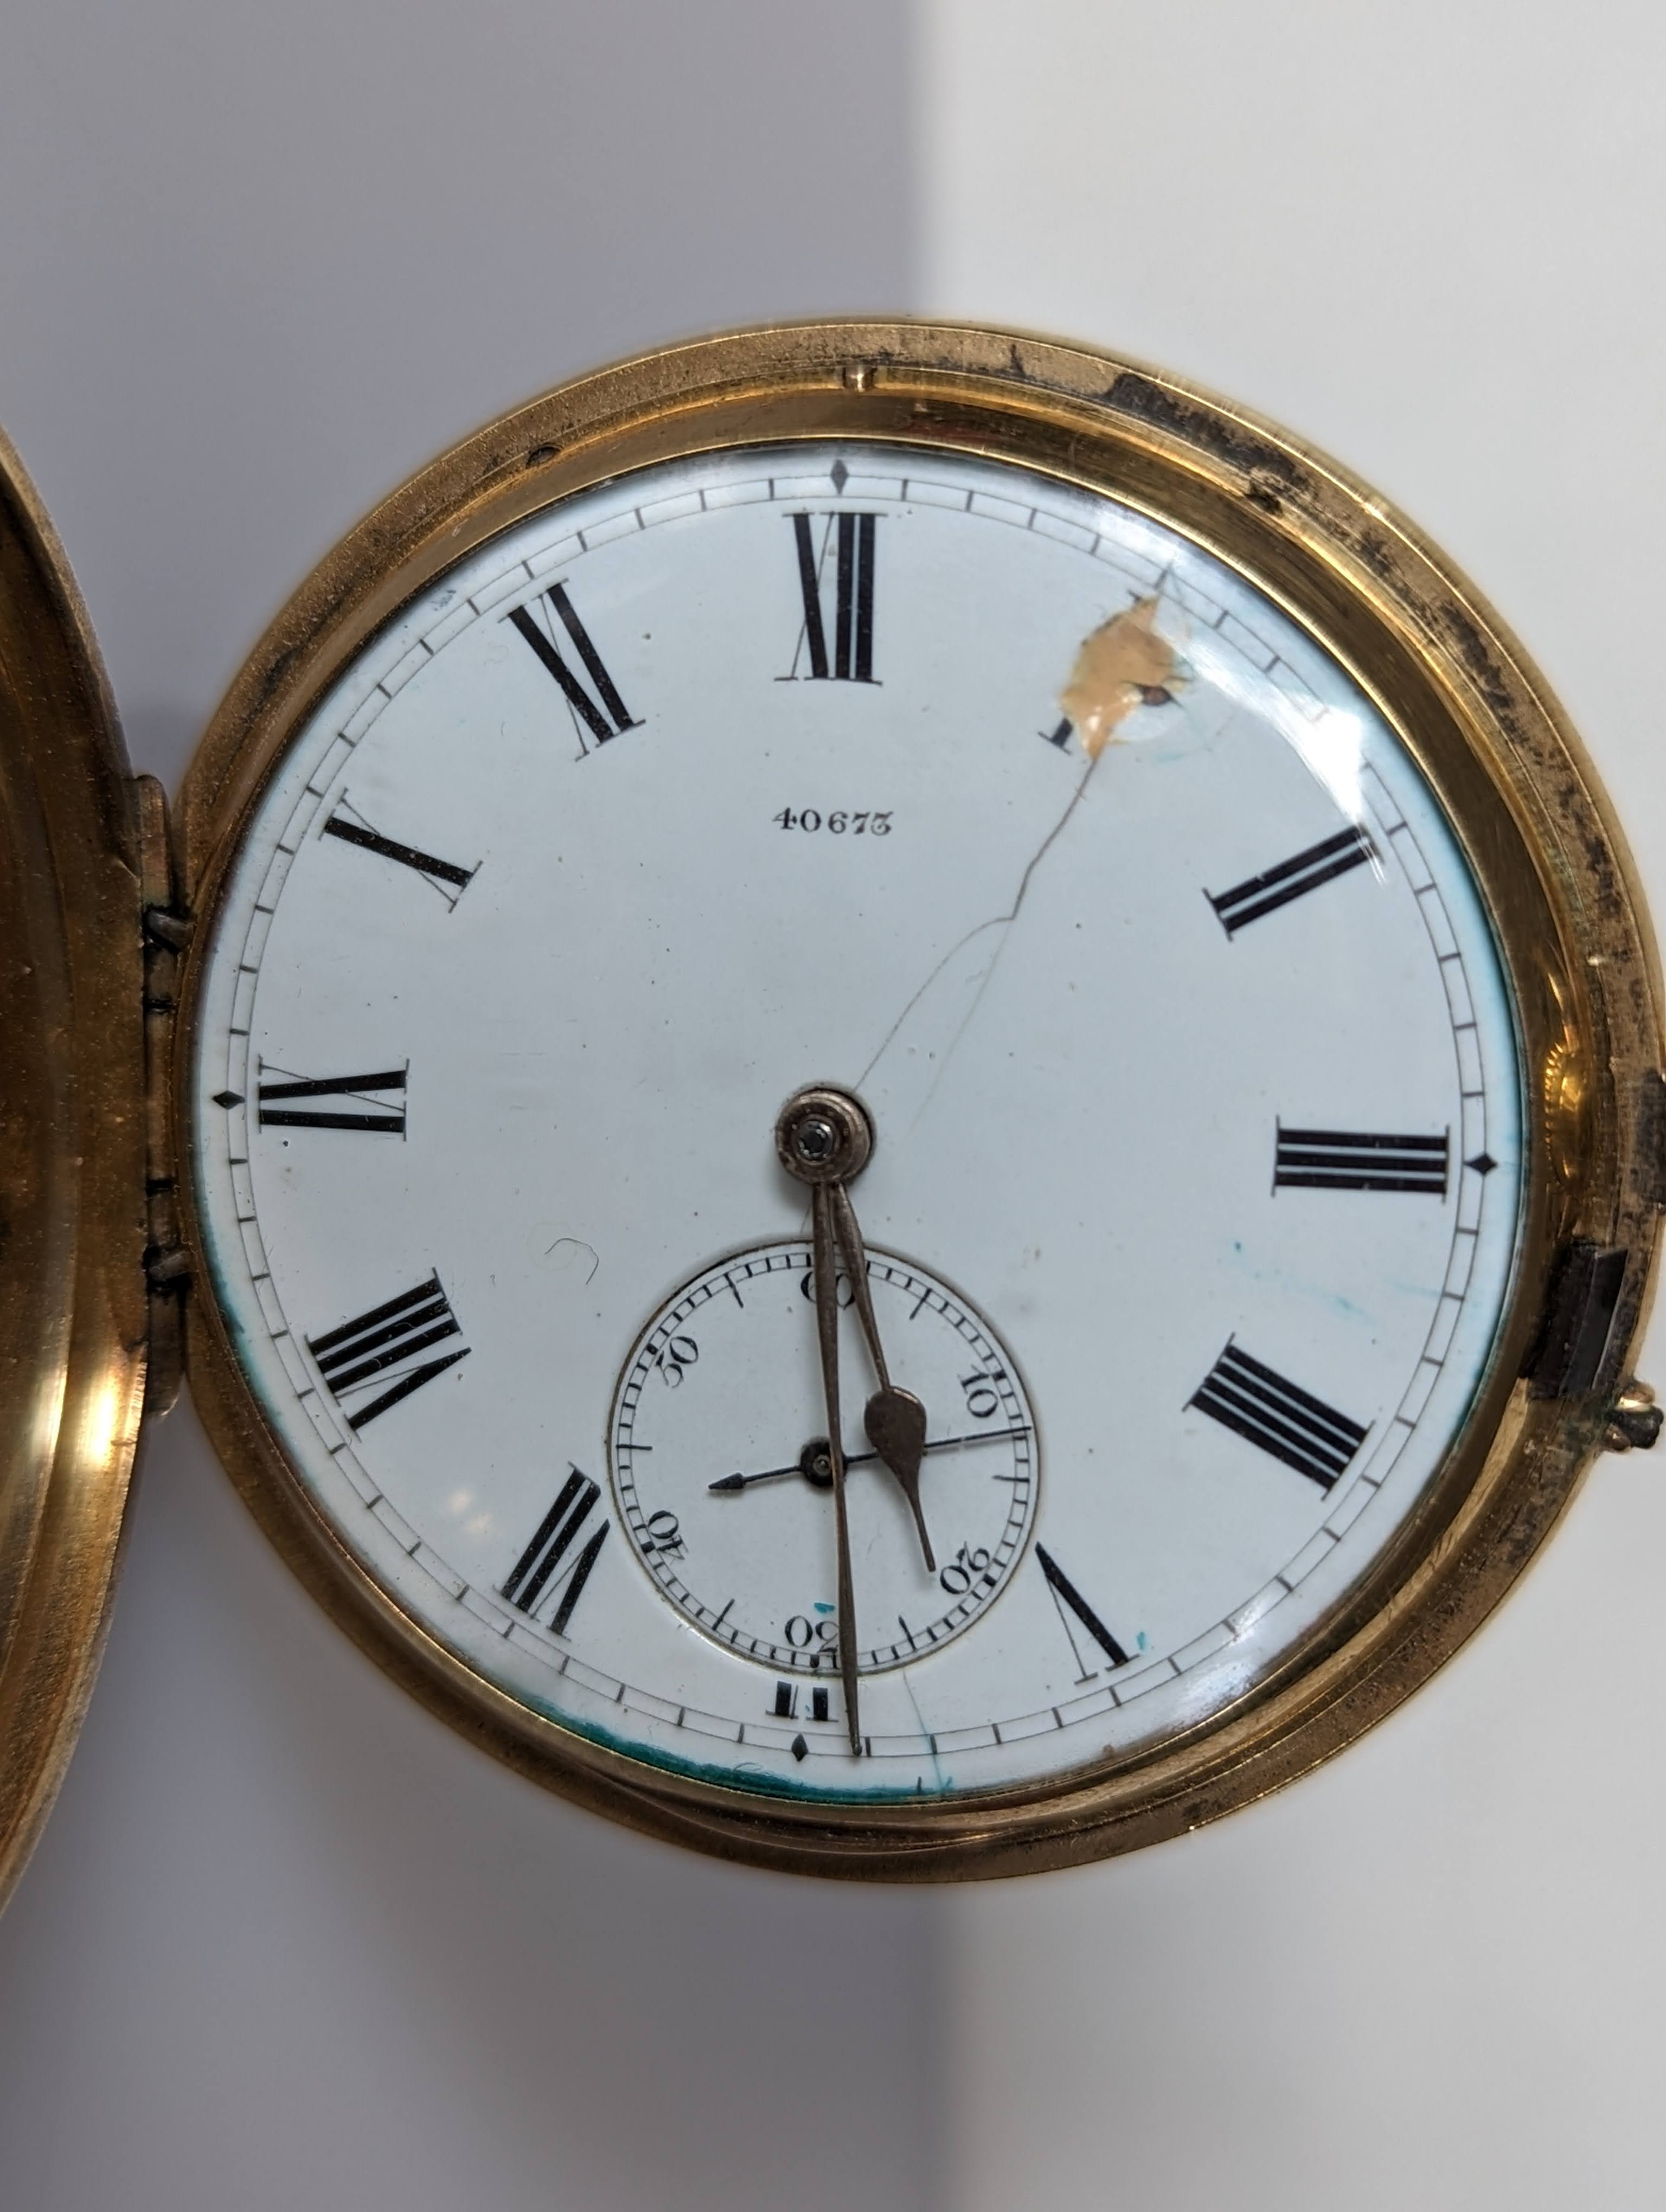 A Victorian gold full-hunter, stem-wind pocket watch with Roman numerals, subsidiary seconds hand - Image 2 of 6